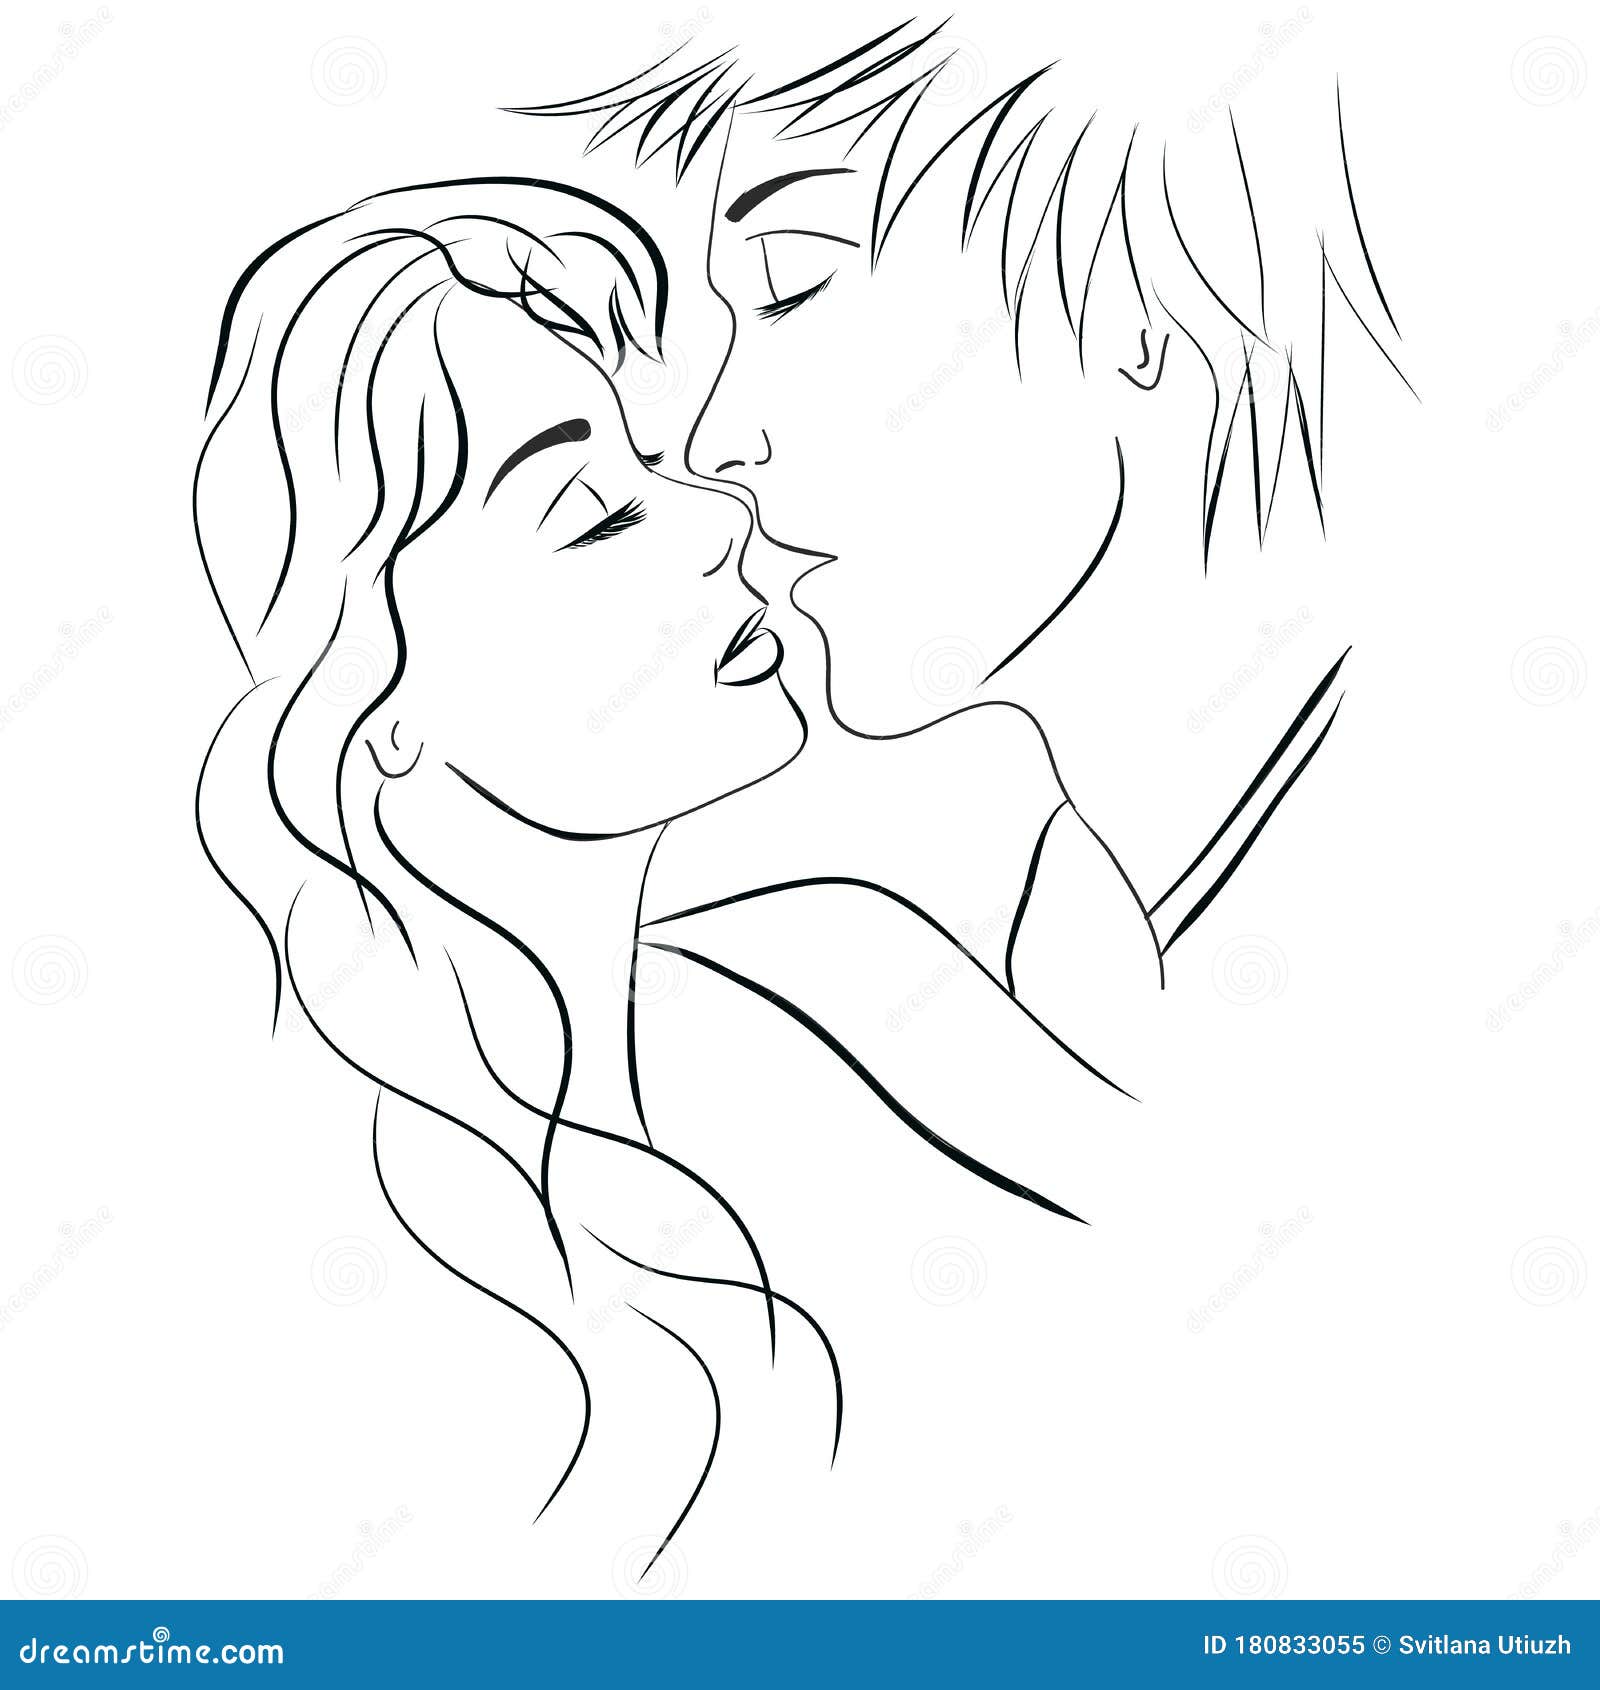 Kiss Love Girl And Boy Relationship Isolated Image Hand Draw Contour On A White Background Stock Illustration Illustration Of Design Heart